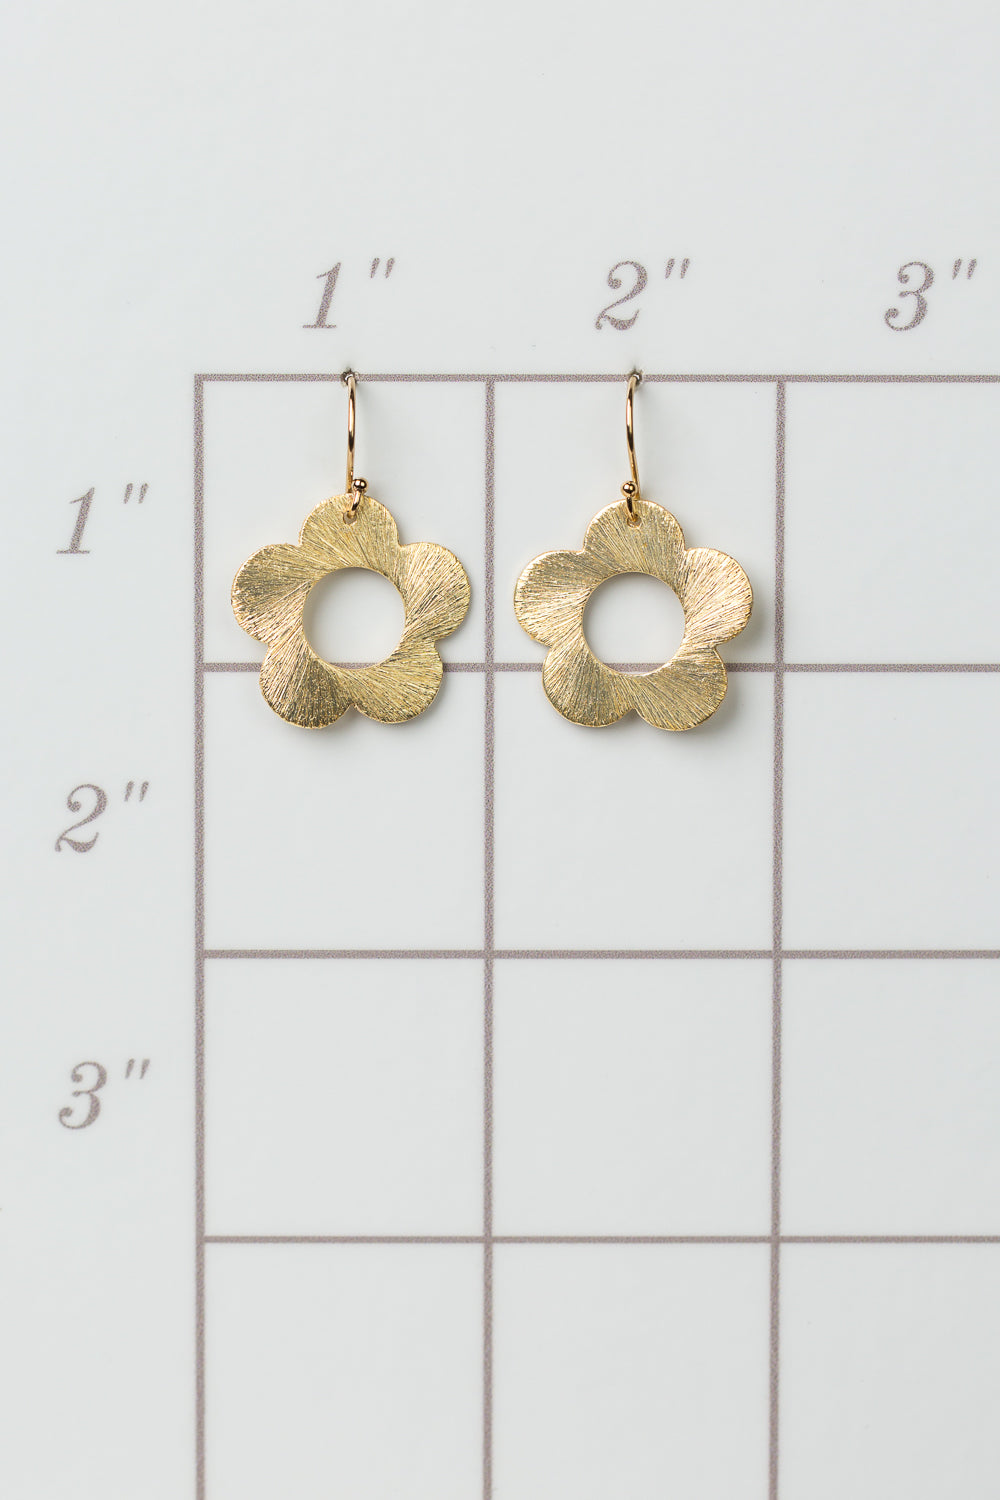 Brushed Gold Small Flower Earrings